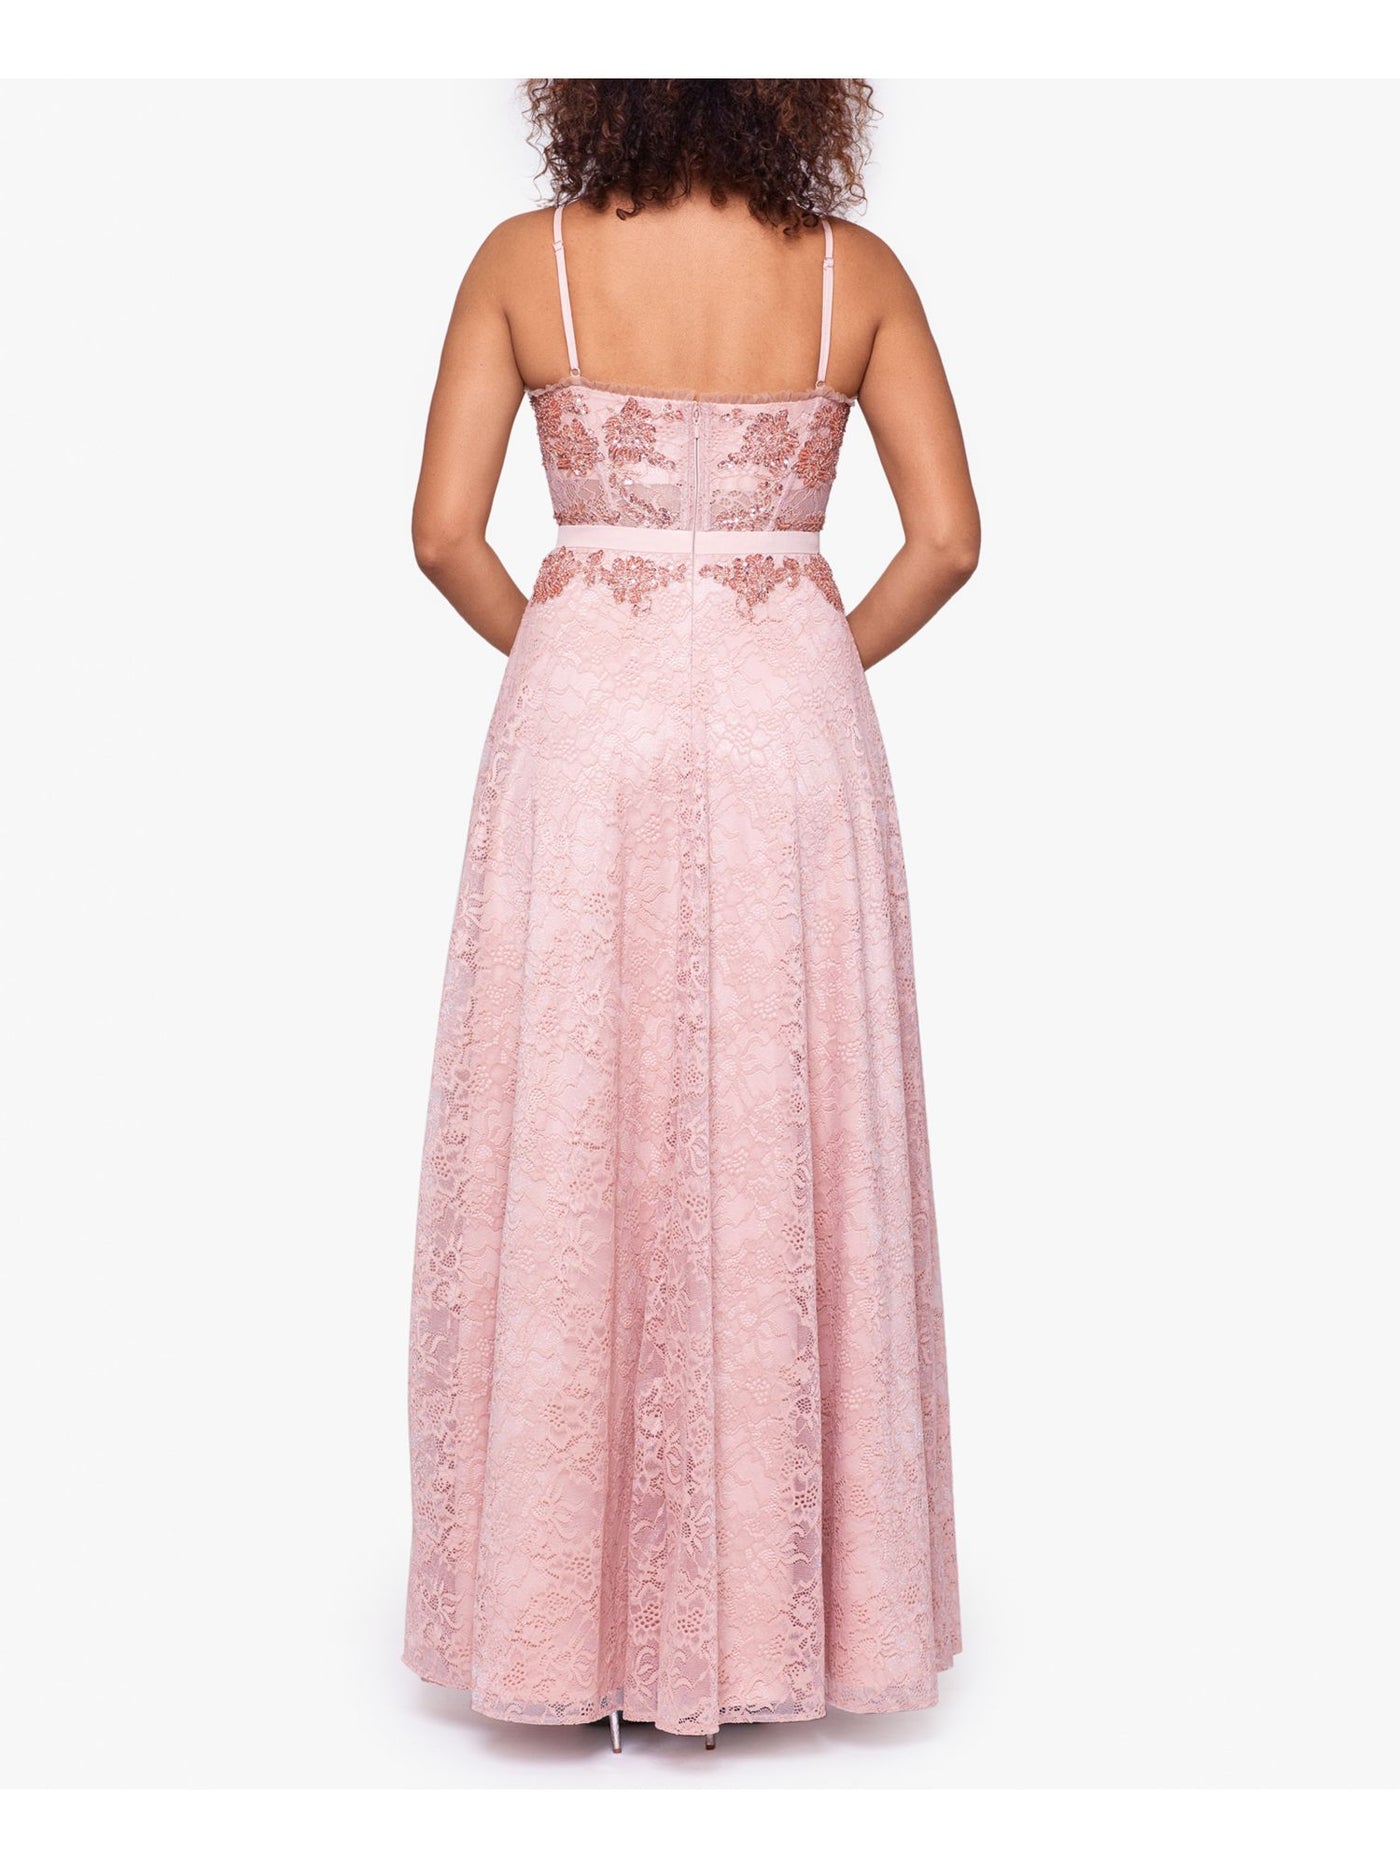 BETSY & ADAM Womens Pink Embellished Adjustable Lined Zippered Lace Spaghetti Strap Square Neck Full-Length Formal Gown Dress 4